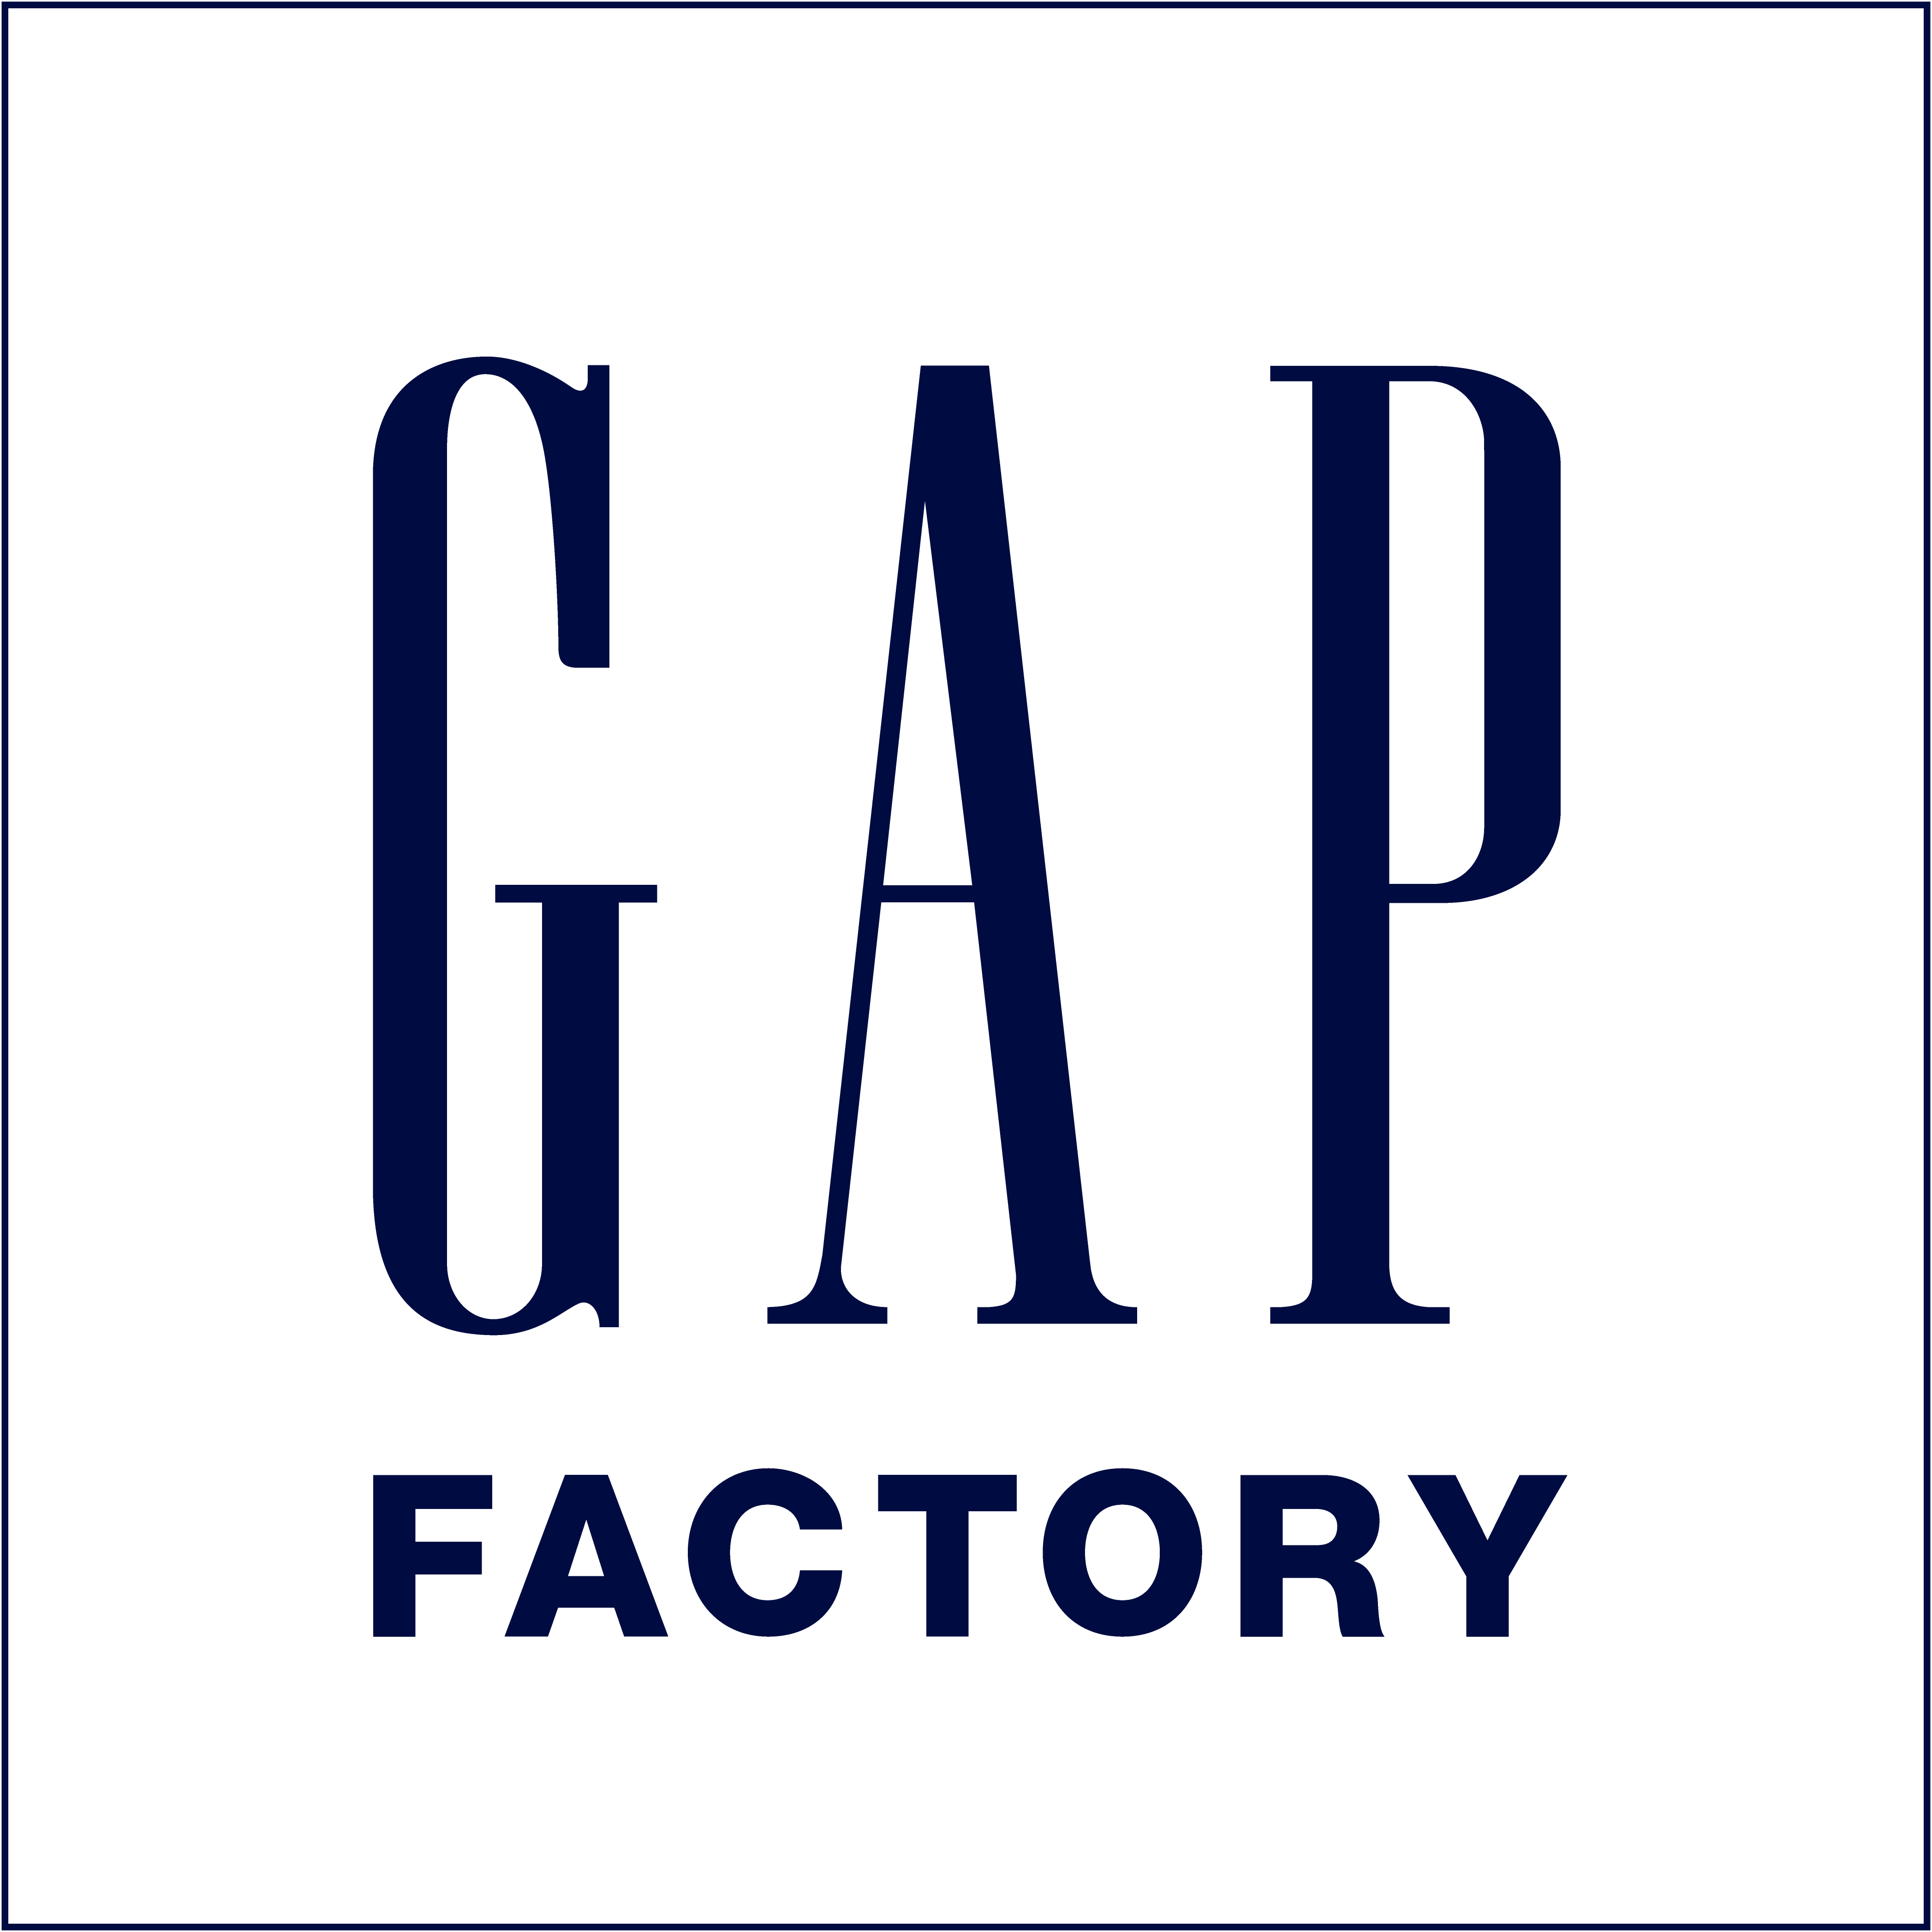 Imbécil impermeable revista Everyday Deals On Clothes For Women, Men, Baby And Kids | Gap Factory